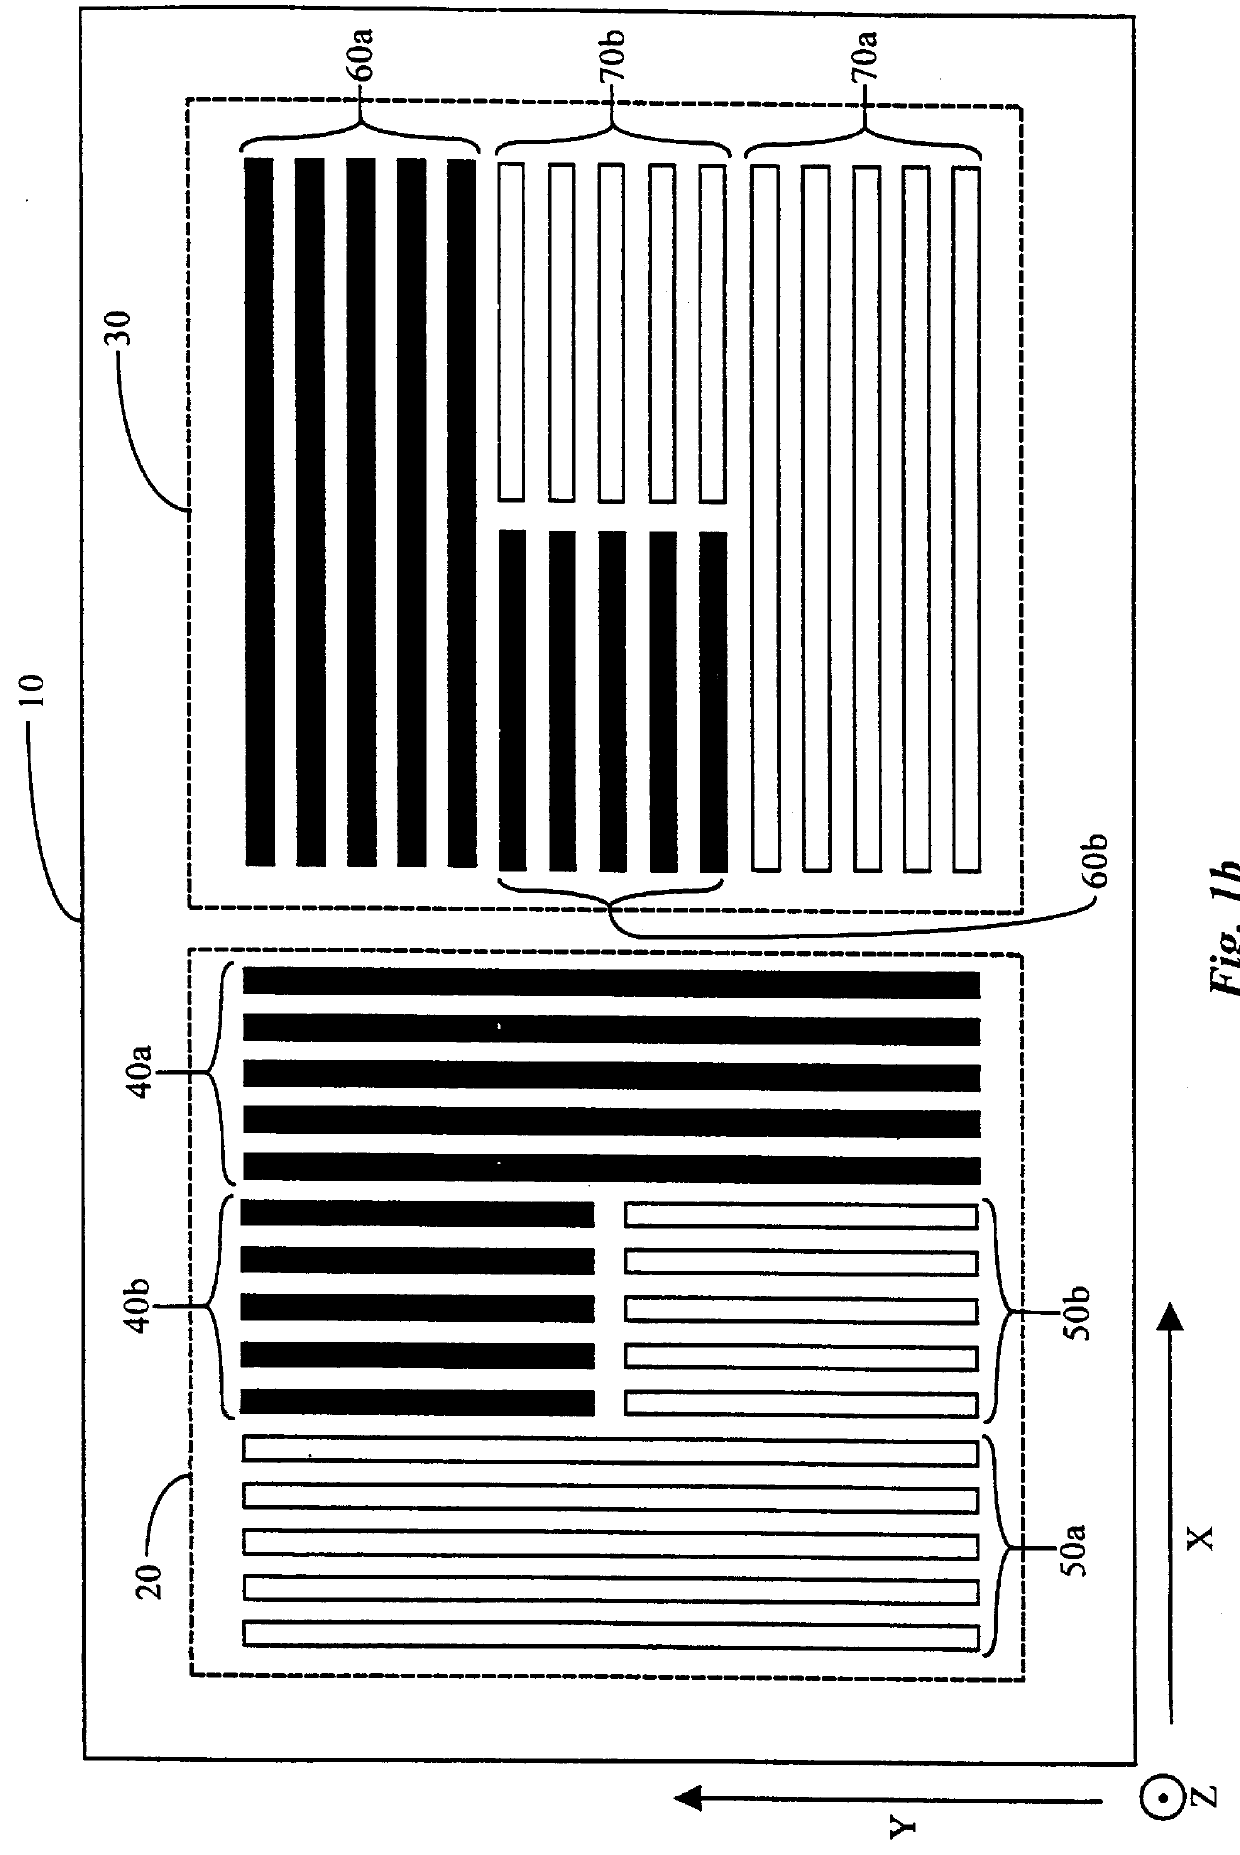 Overlay alignment measurement of wafers